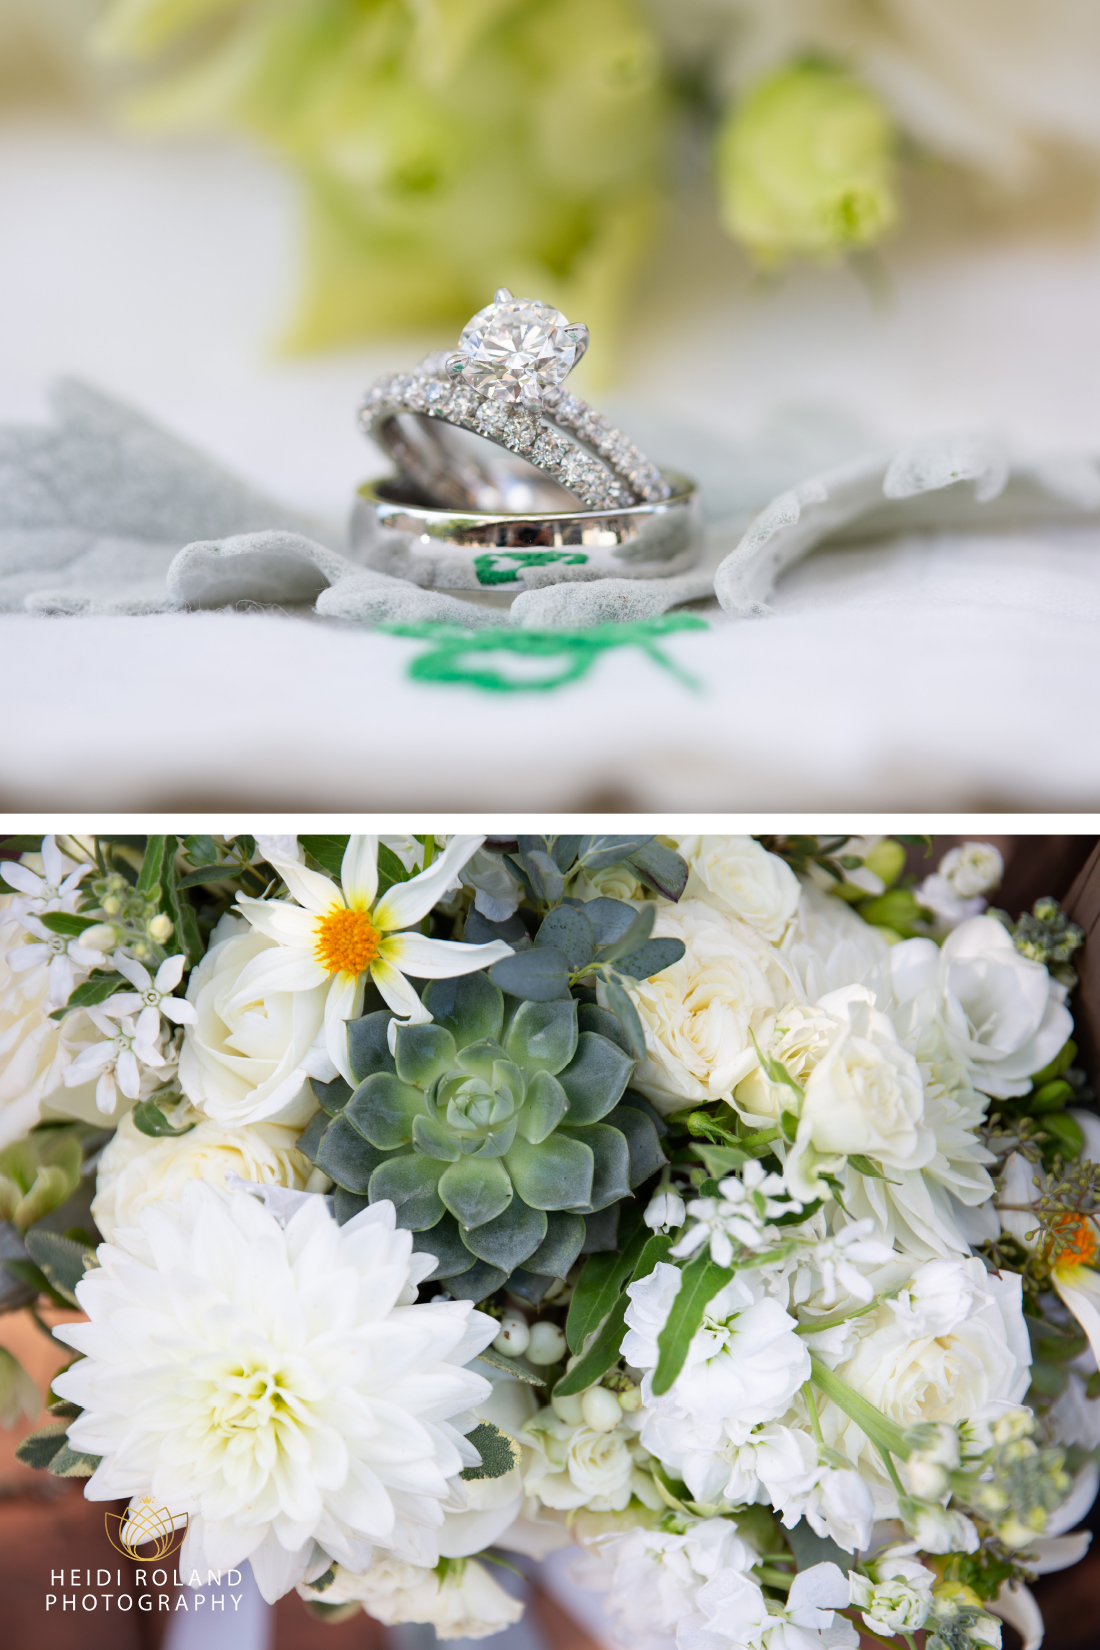 wedding rings and succulent bridal bouquet